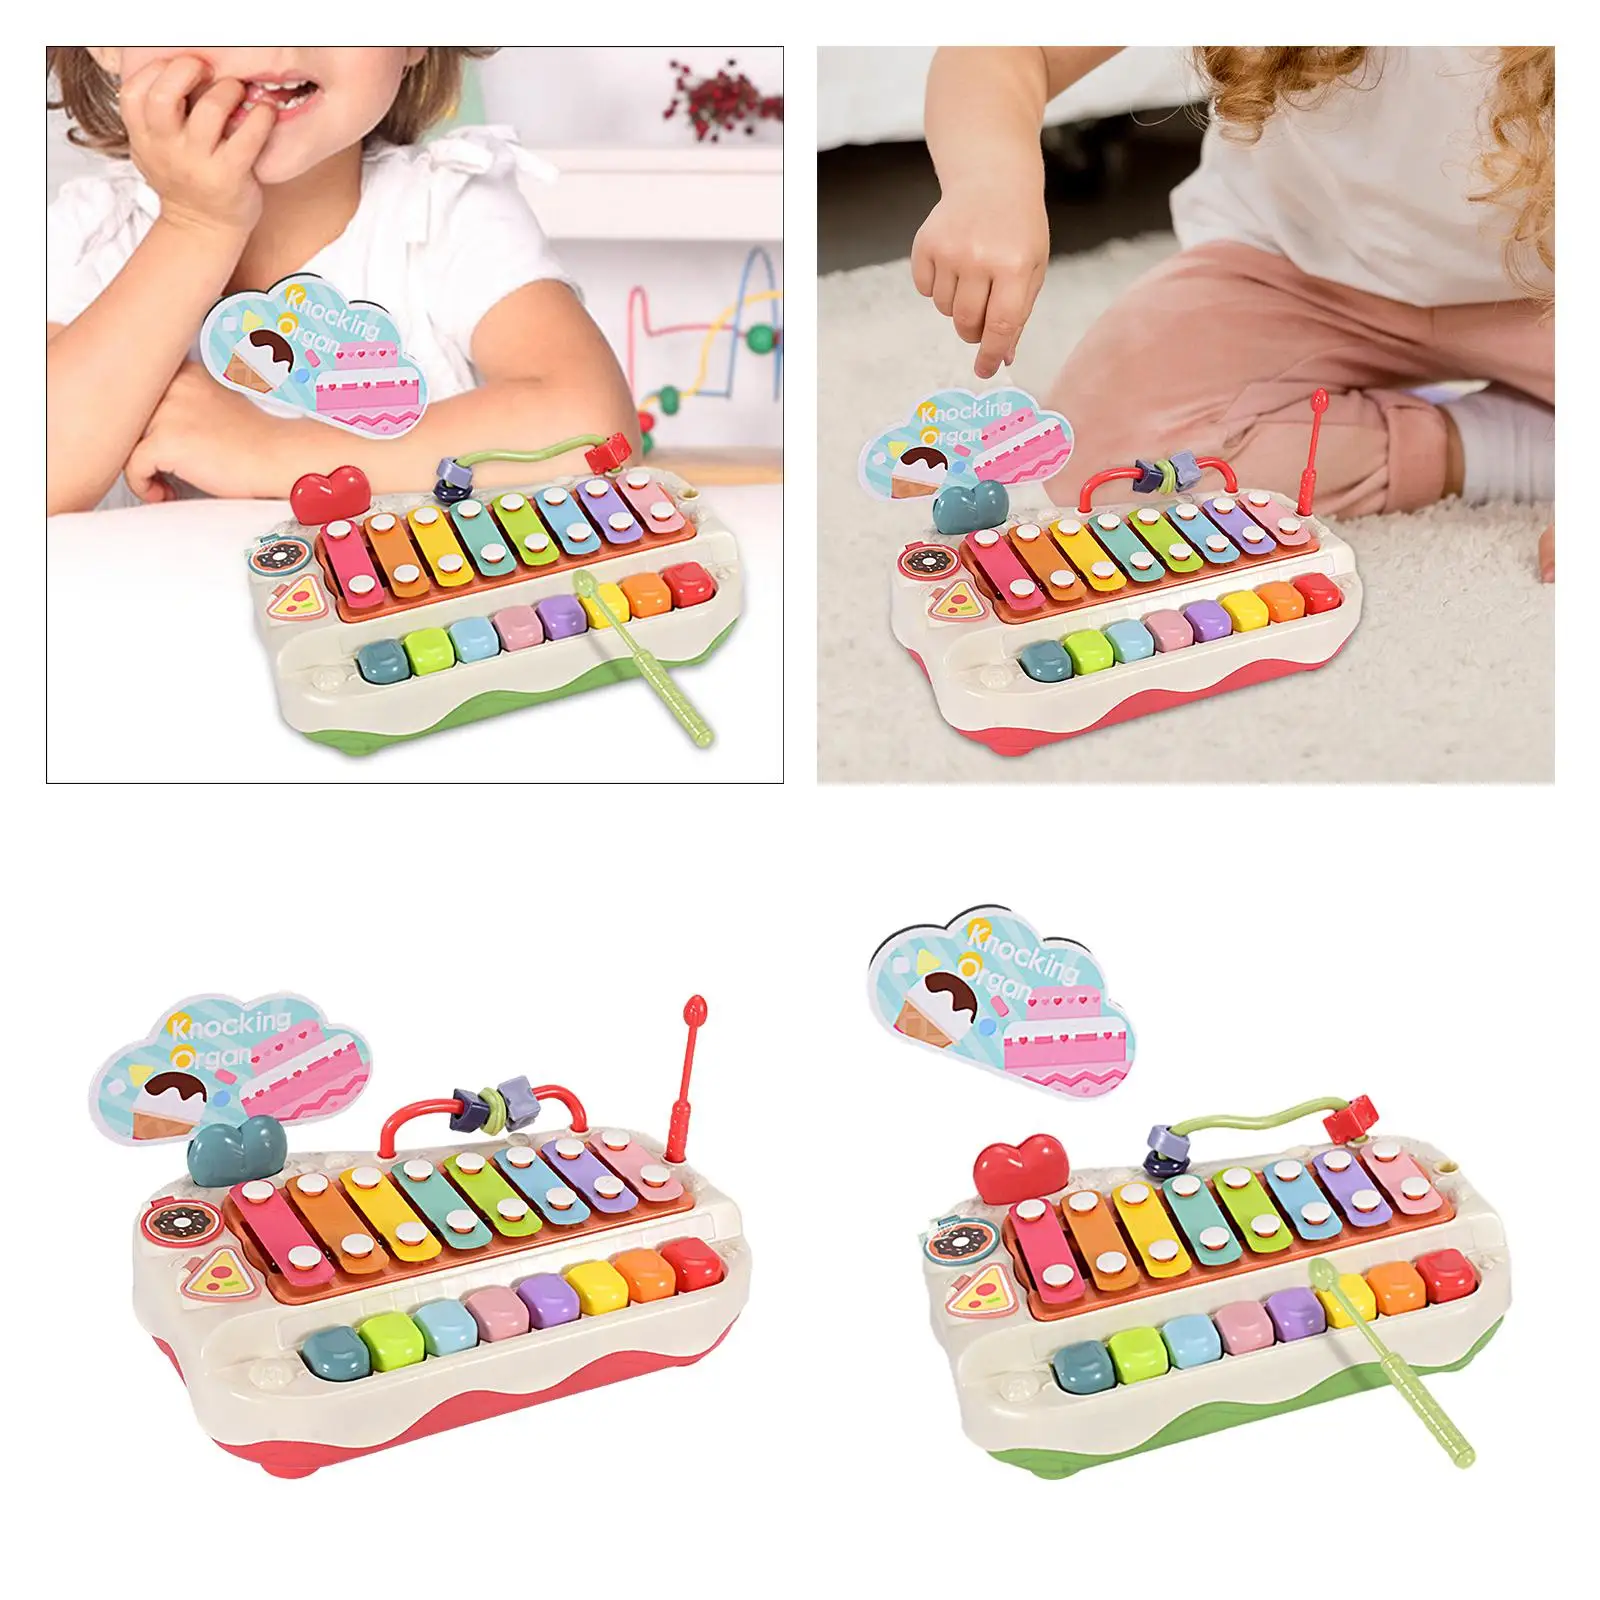 Kids Musical Toy Multicolored Piano Toy Musical Instrument Toy for Baby 1 2 3 Years Old Kids Boy Girls Toddler Birthday Gift